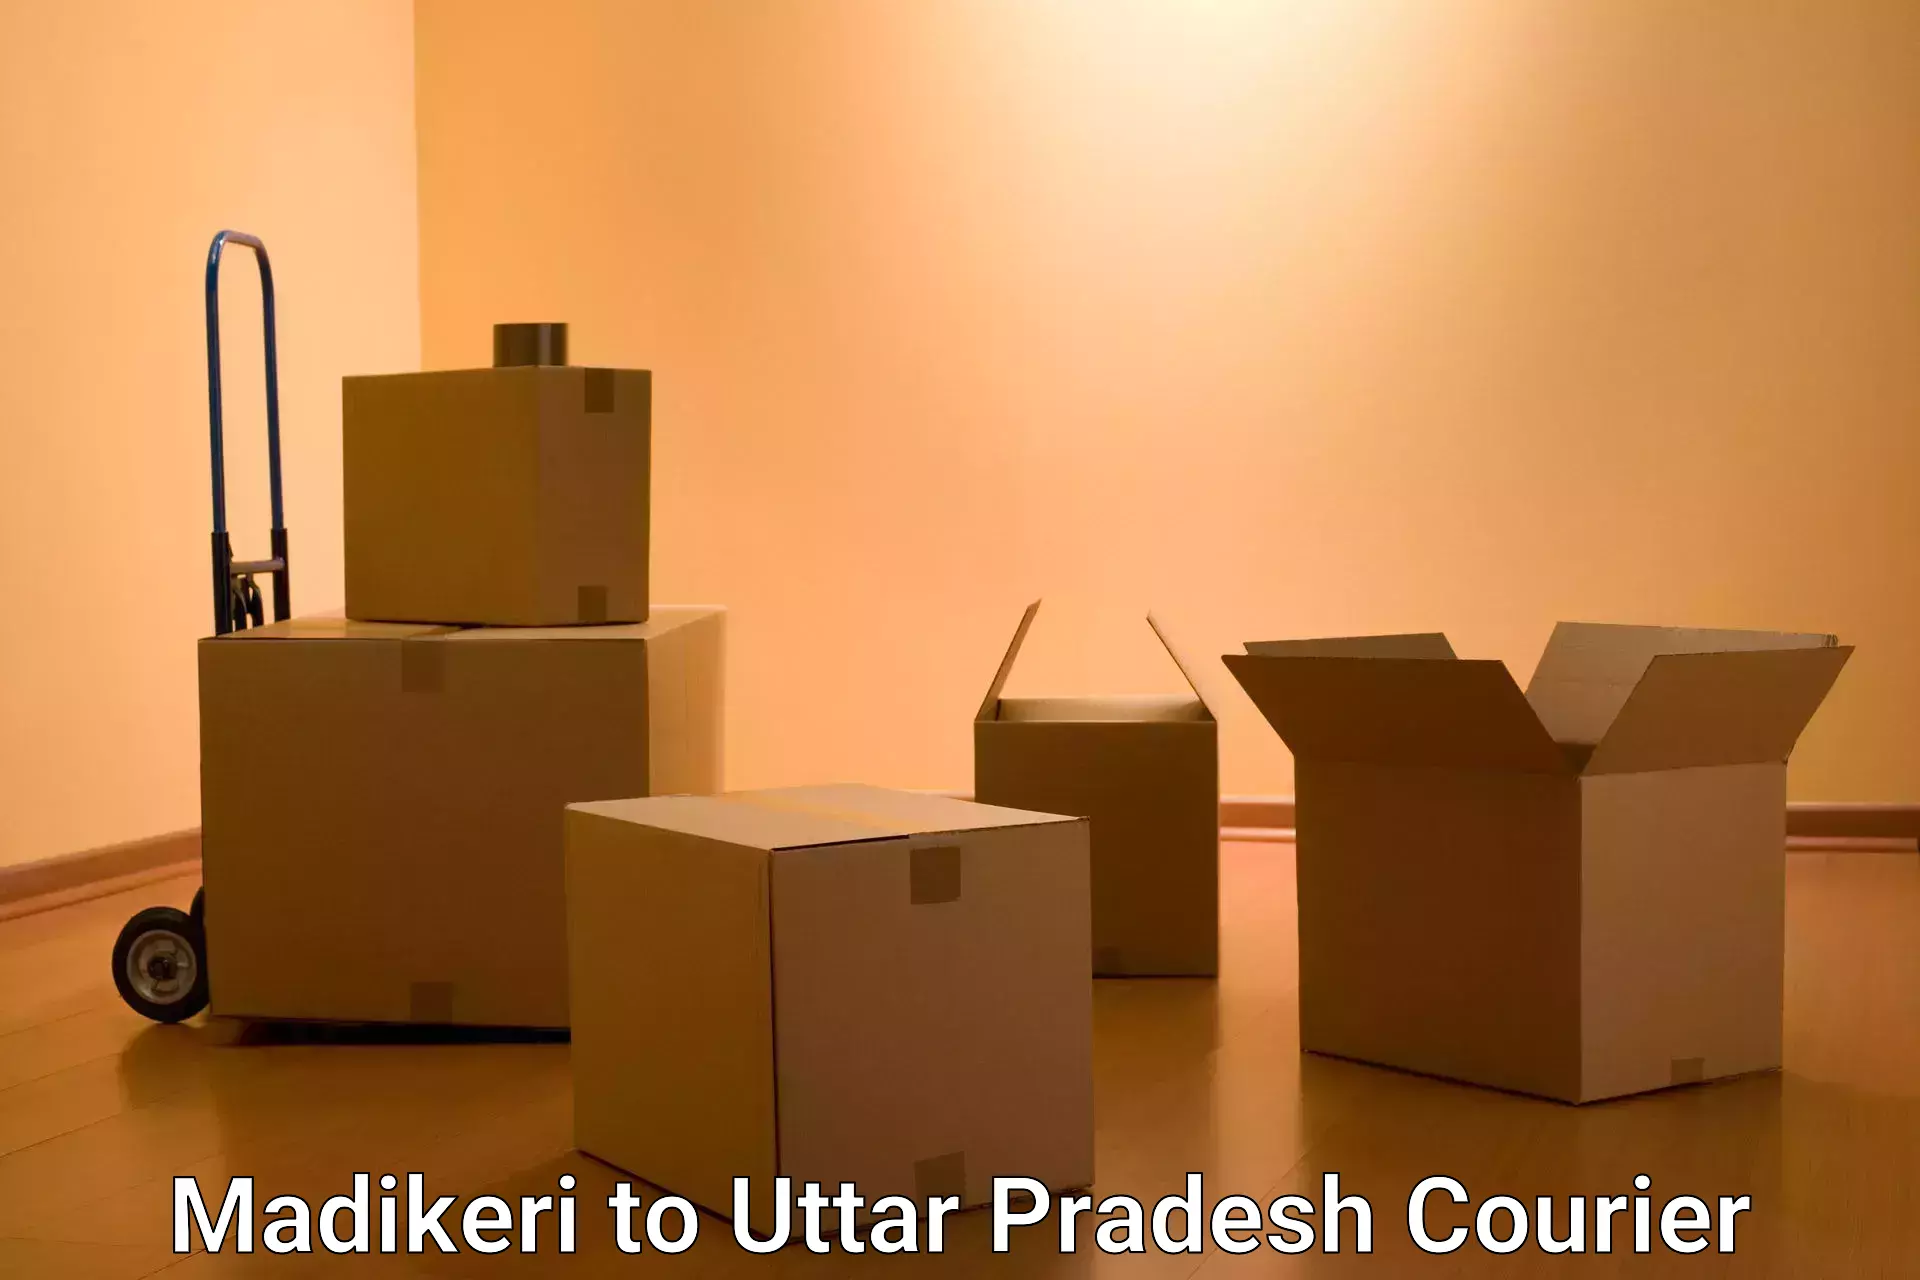 Courier service partnerships Madikeri to Sitapur